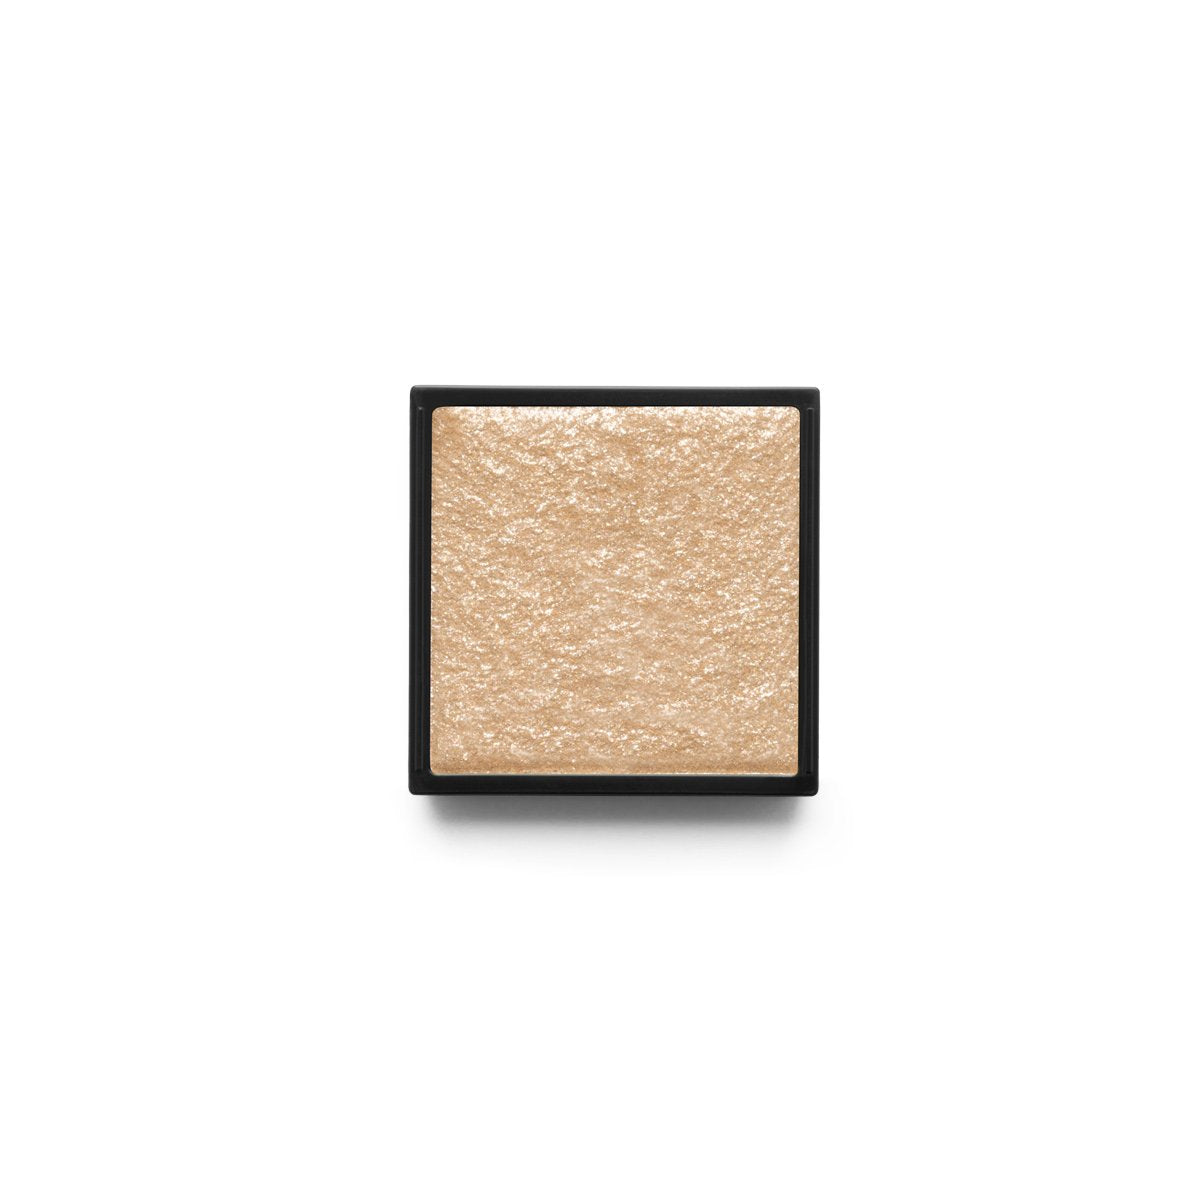 STARR - SHIMMERING CHAMPAGNE - shimmer finish eyeshadow in champagne shade 